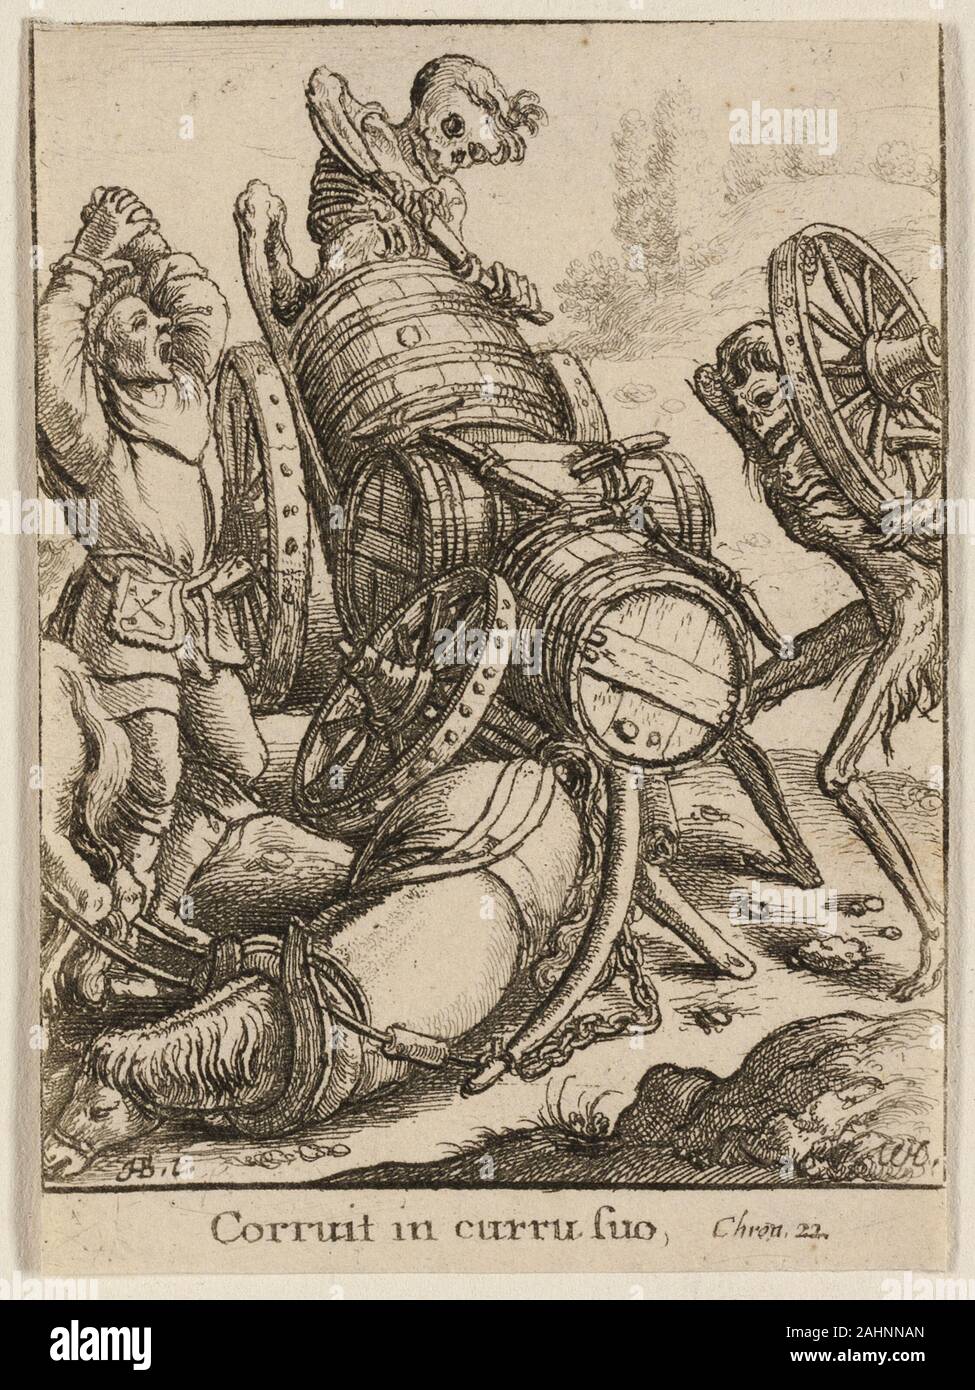 Wenceslaus Hollar. The Waggoner and Death. 1651. Bohemia. Etching on ivory wove paper Stock Photo